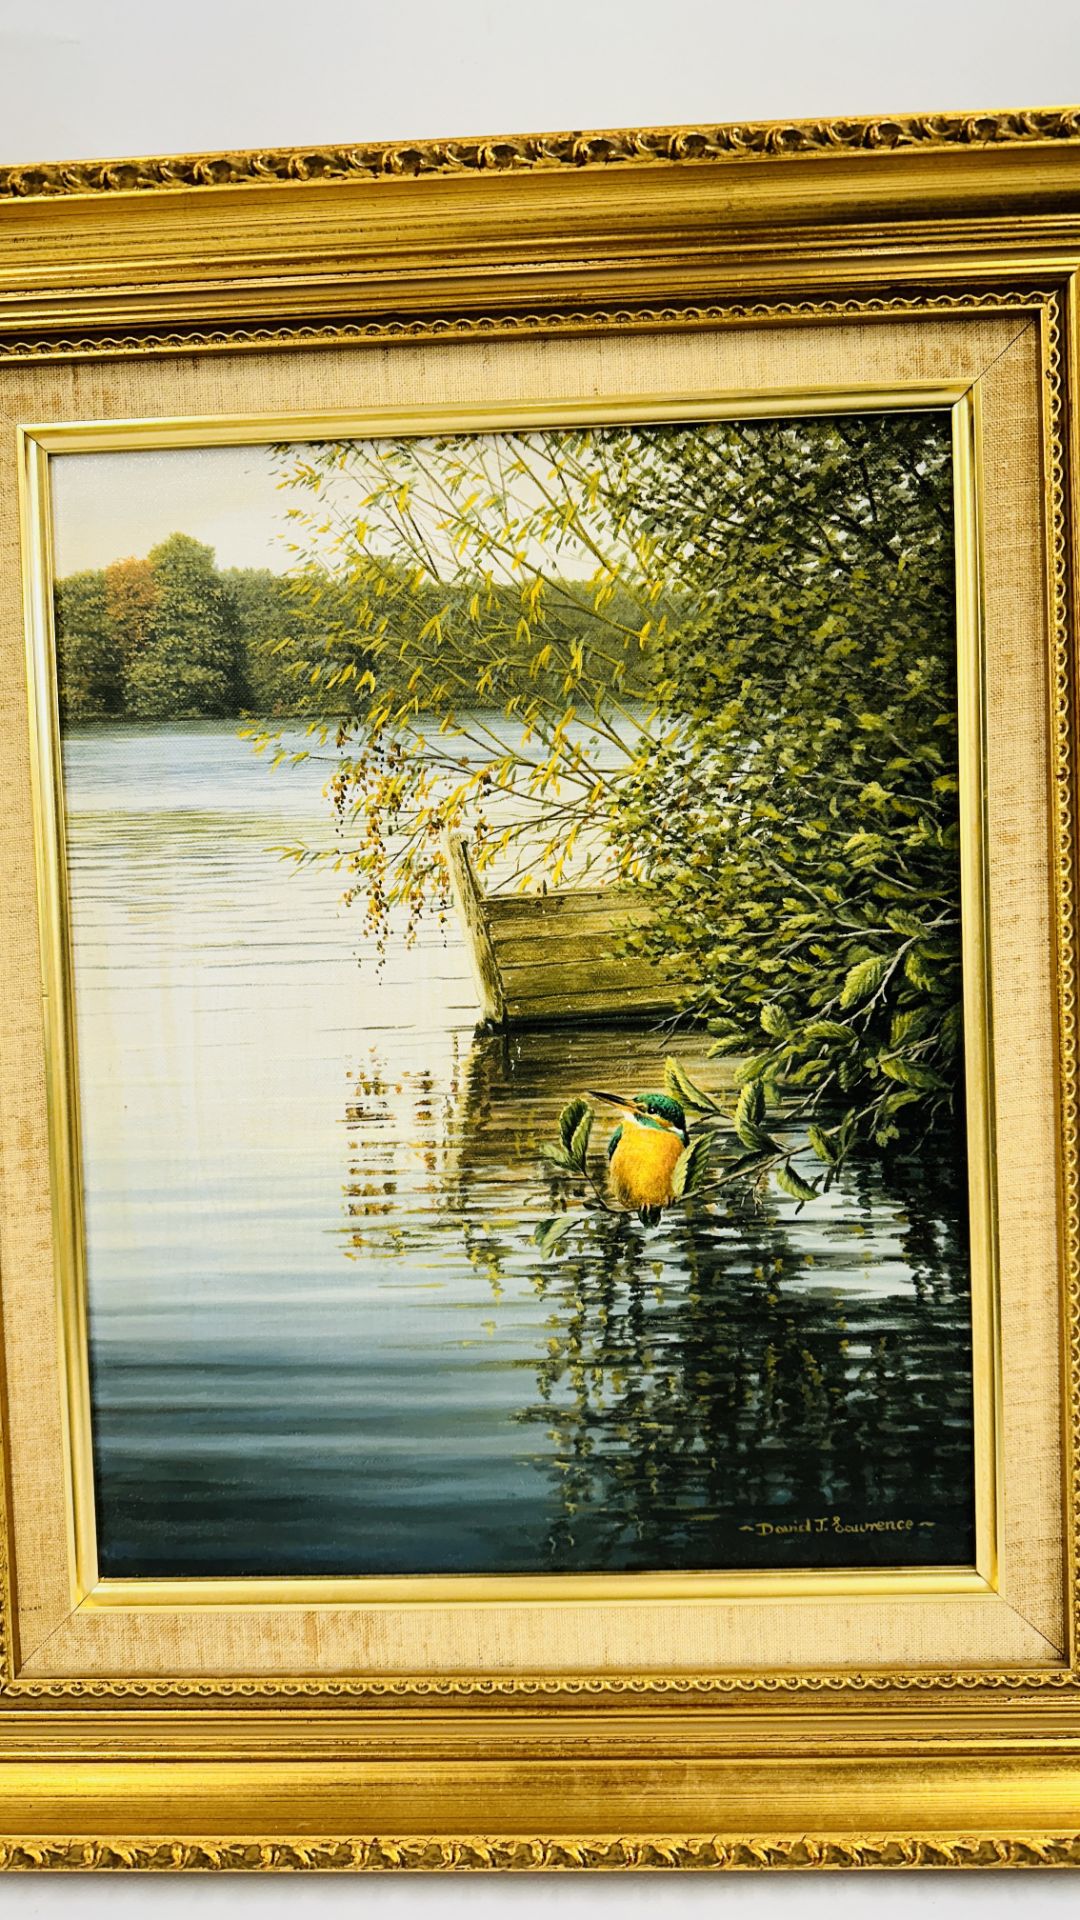 OIL ON CANVAS "KINGFISHER" BEARING SIGNATURE DAVID J LAWRENCE 27CM X 34.5CM IN GILT FRAME. - Image 2 of 6